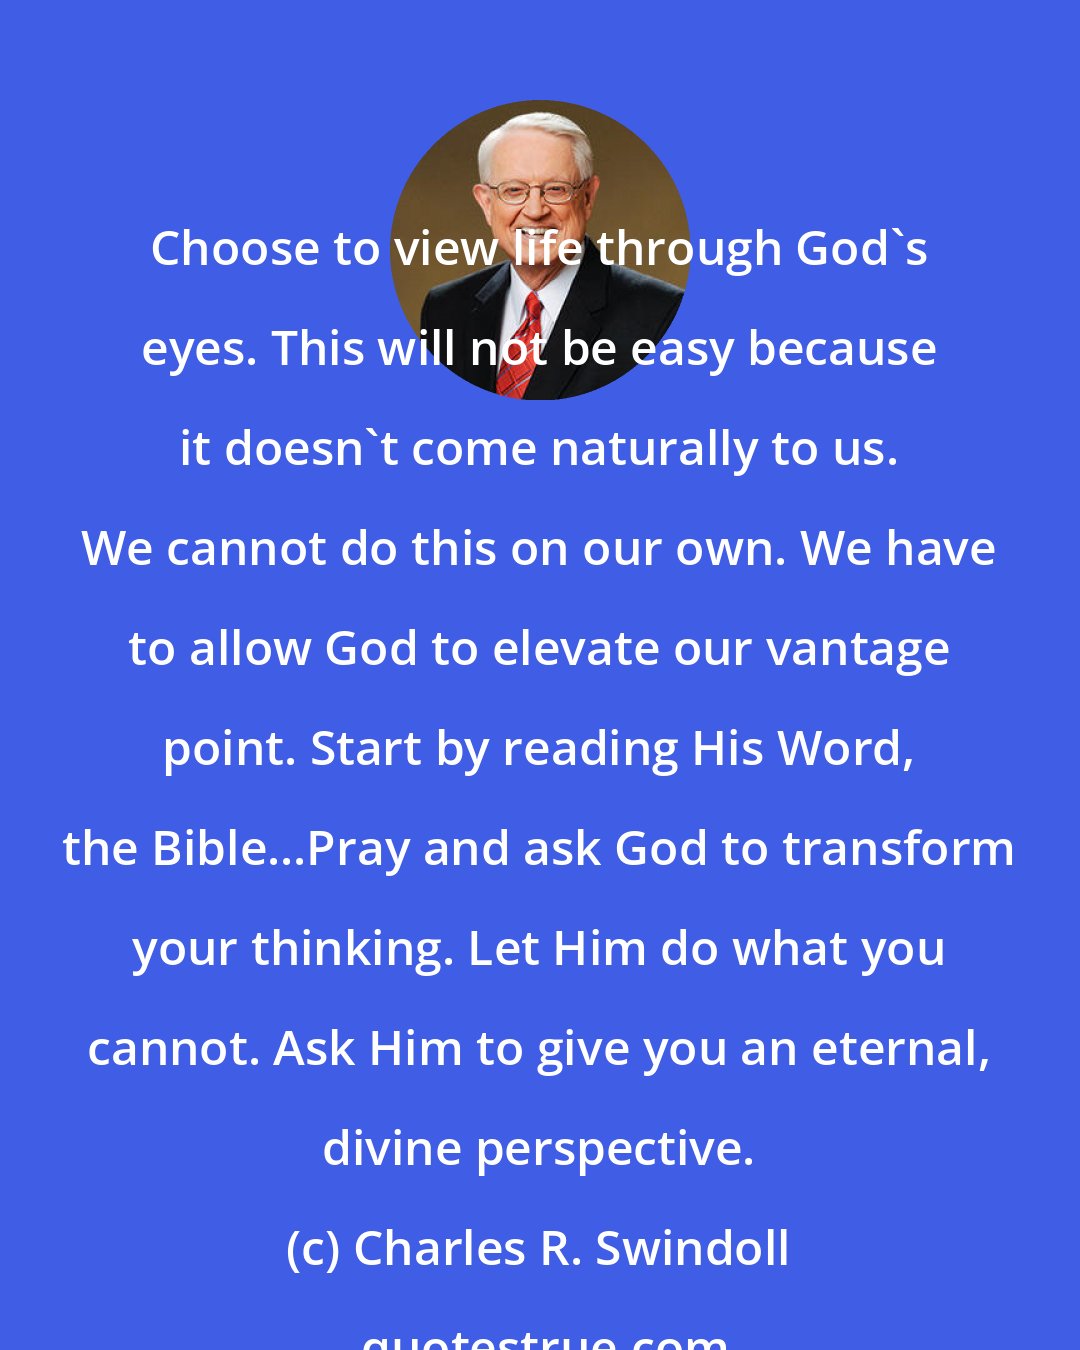 Charles R. Swindoll: Choose to view life through God's eyes. This will not be easy because it doesn't come naturally to us. We cannot do this on our own. We have to allow God to elevate our vantage point. Start by reading His Word, the Bible...Pray and ask God to transform your thinking. Let Him do what you cannot. Ask Him to give you an eternal, divine perspective.